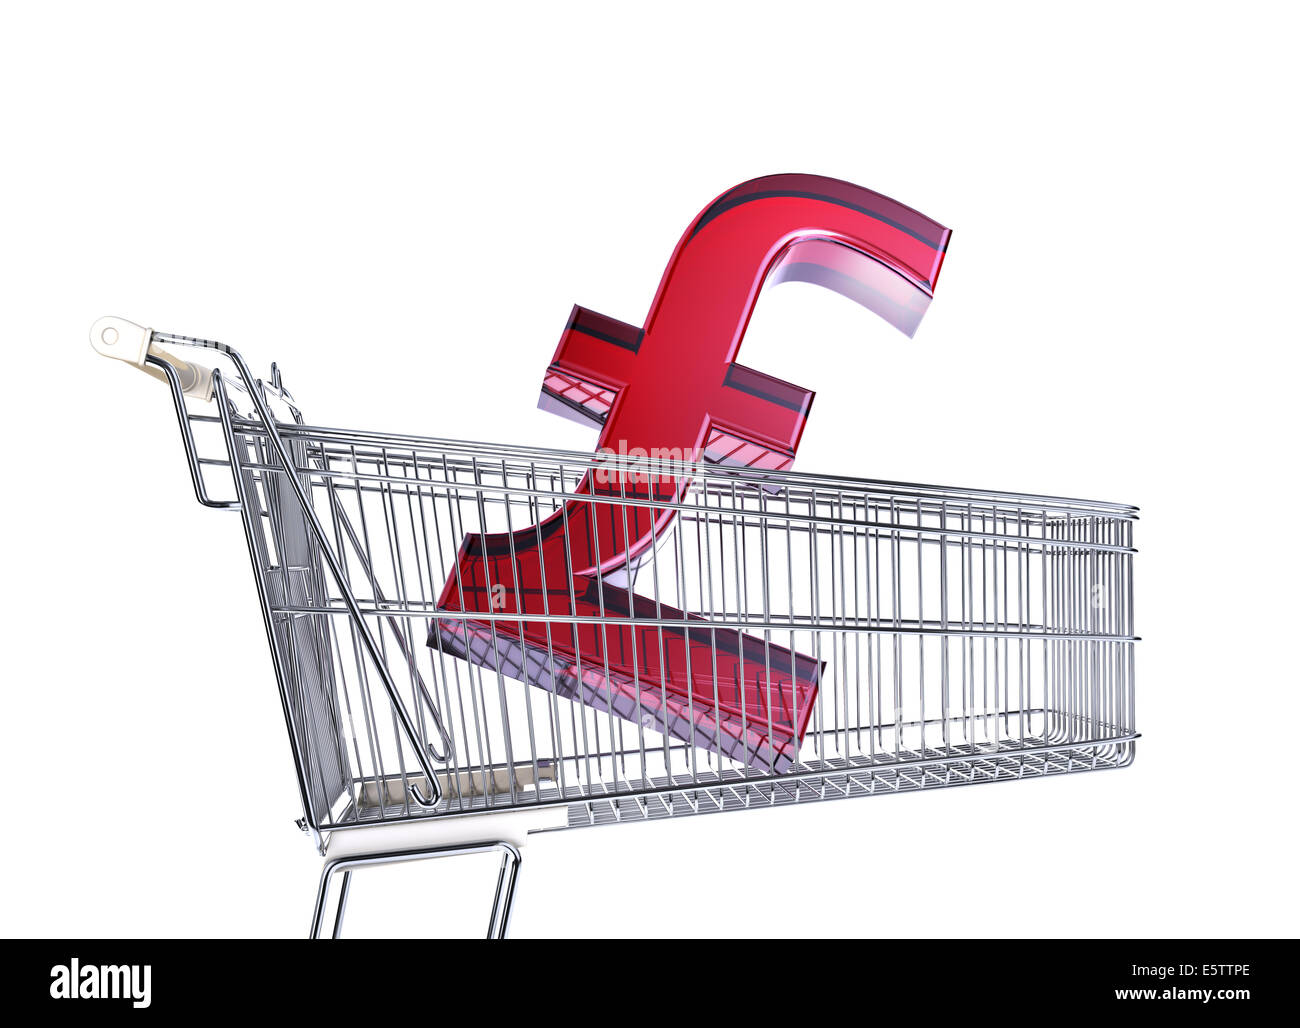 Supermarket trolley with big Sterling sign inside it. Side view, on white background. Stock Photo